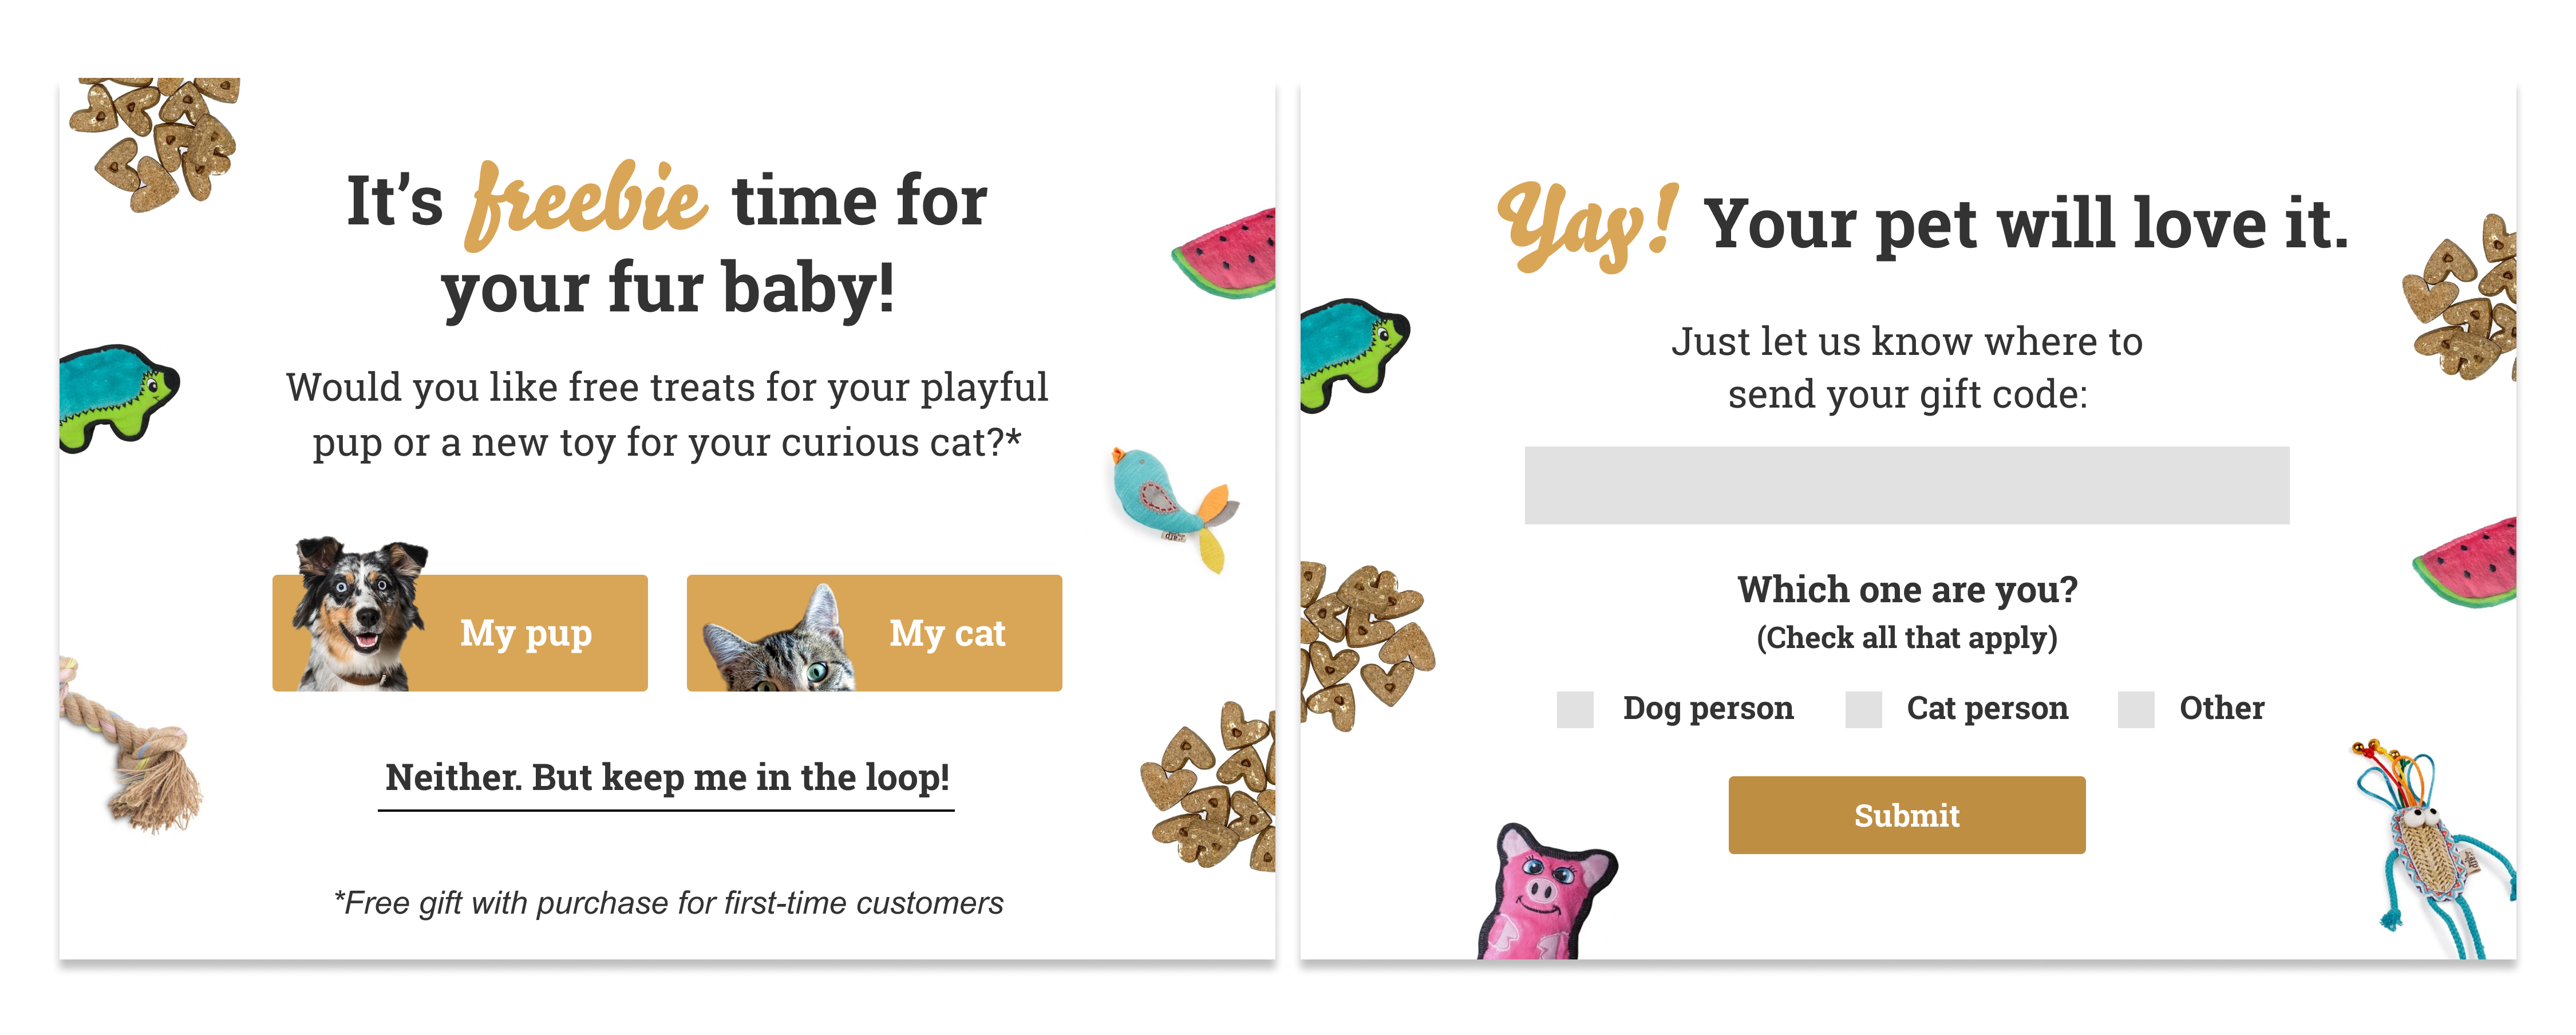 Pop-up from Tomlinson's Feed which asks customers if they'd prefer a cat toy or dog treat, and then asks what kind of pet they own